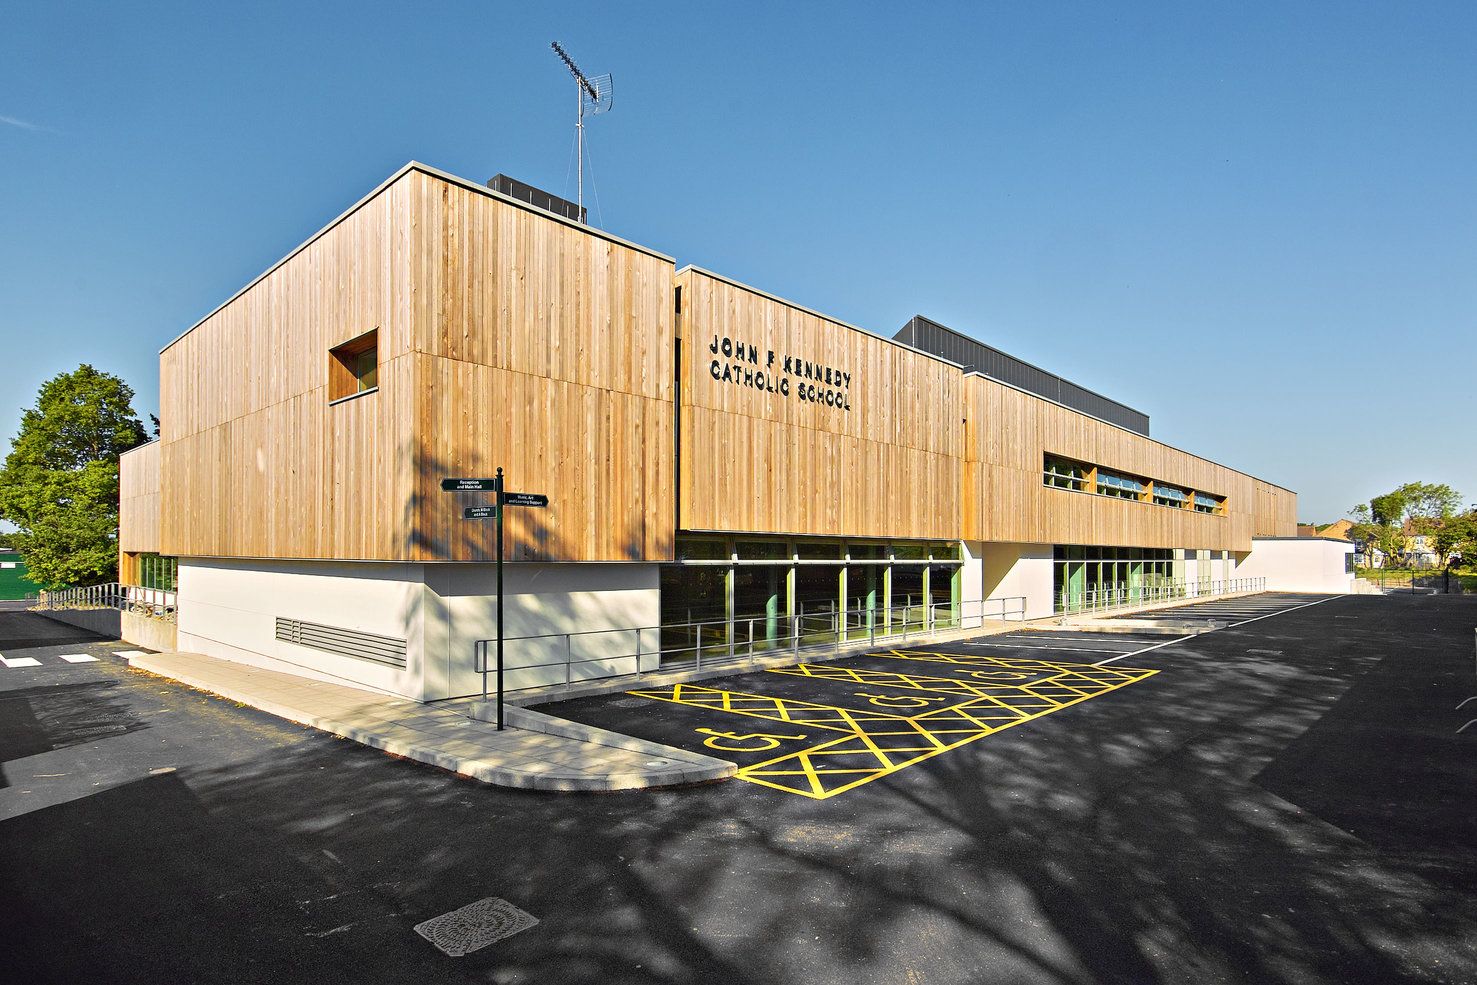 view of BCL timber cladding wooden slatted panels installed at The John F Kennedy School in Hemel Hempstead